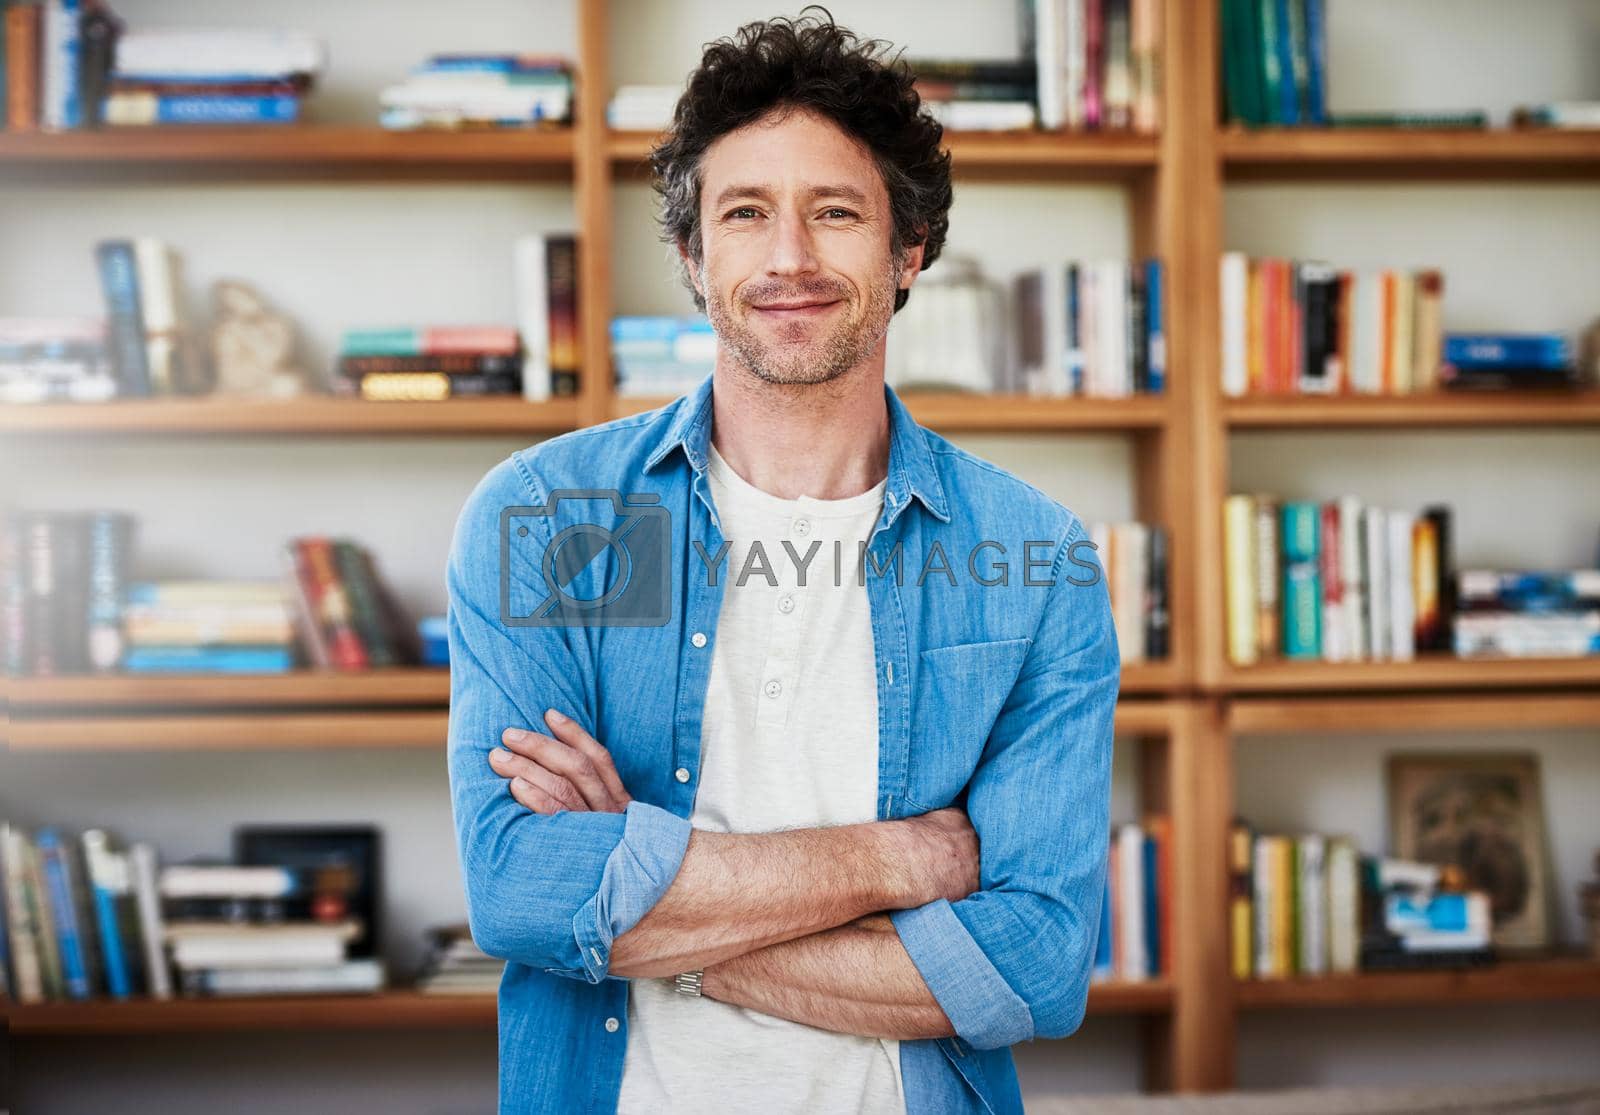 Royalty free image of Hes a self-professed bibliophile. Shot of a happy bachelor posing with his arms crossed in front of a bookshelf at home. by YuriArcurs